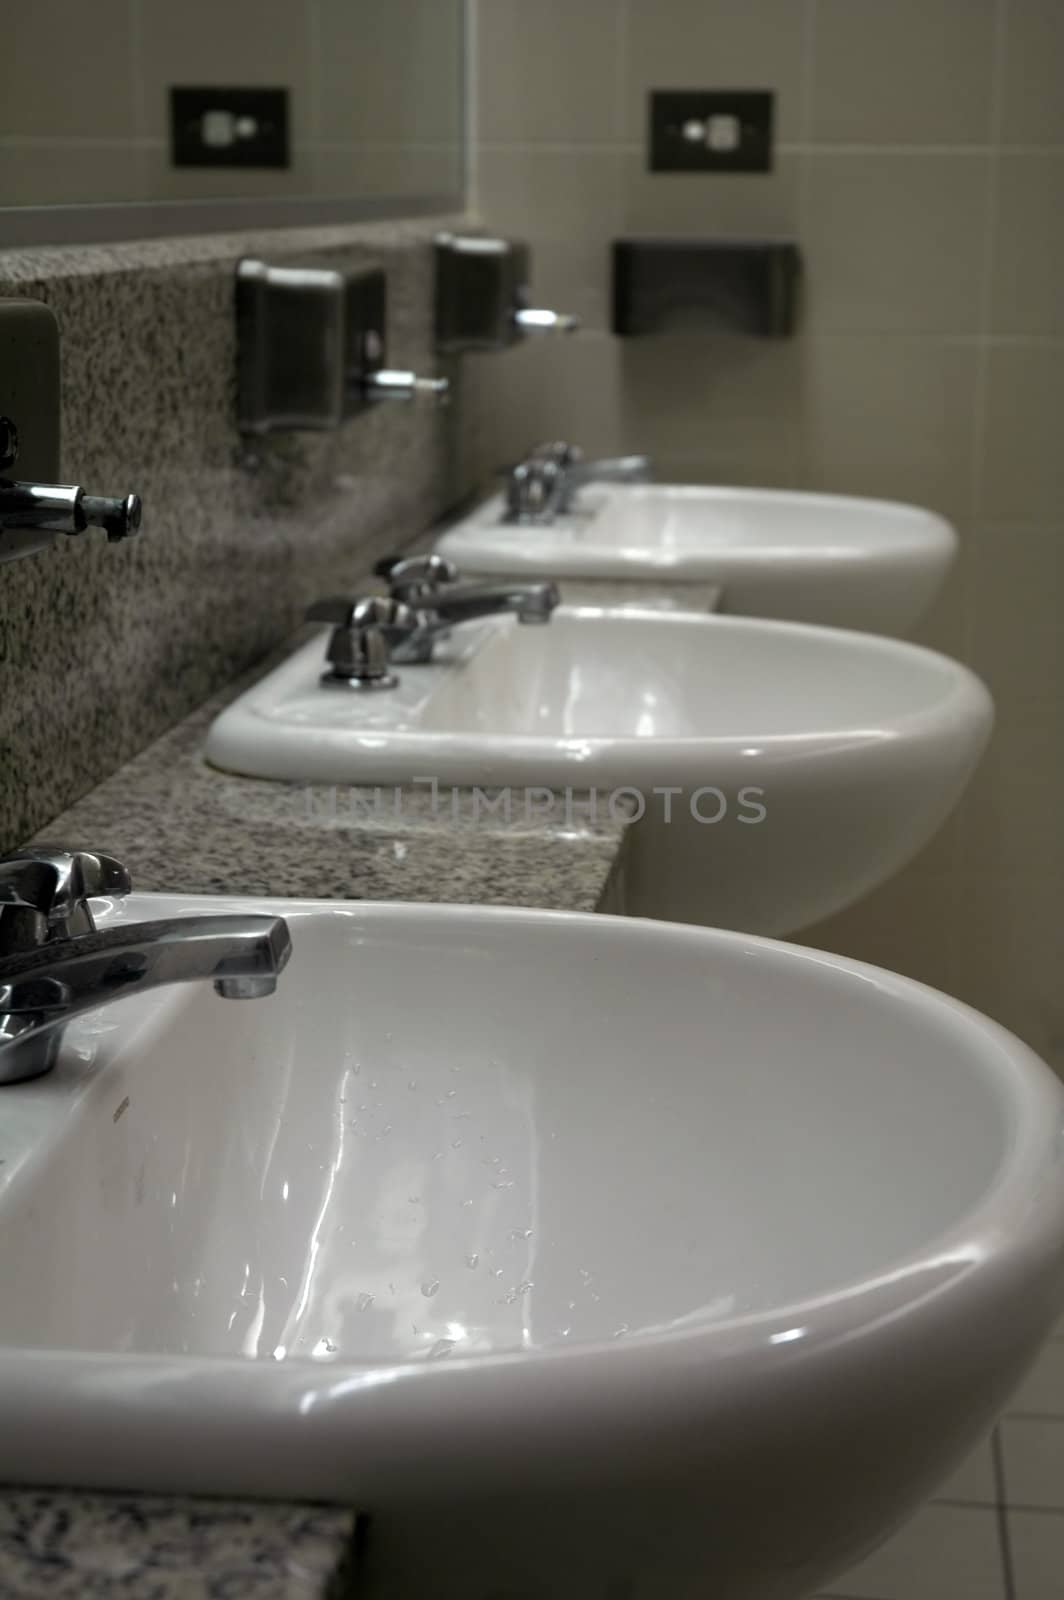 three white sinks in public toilets, mirror on the wall